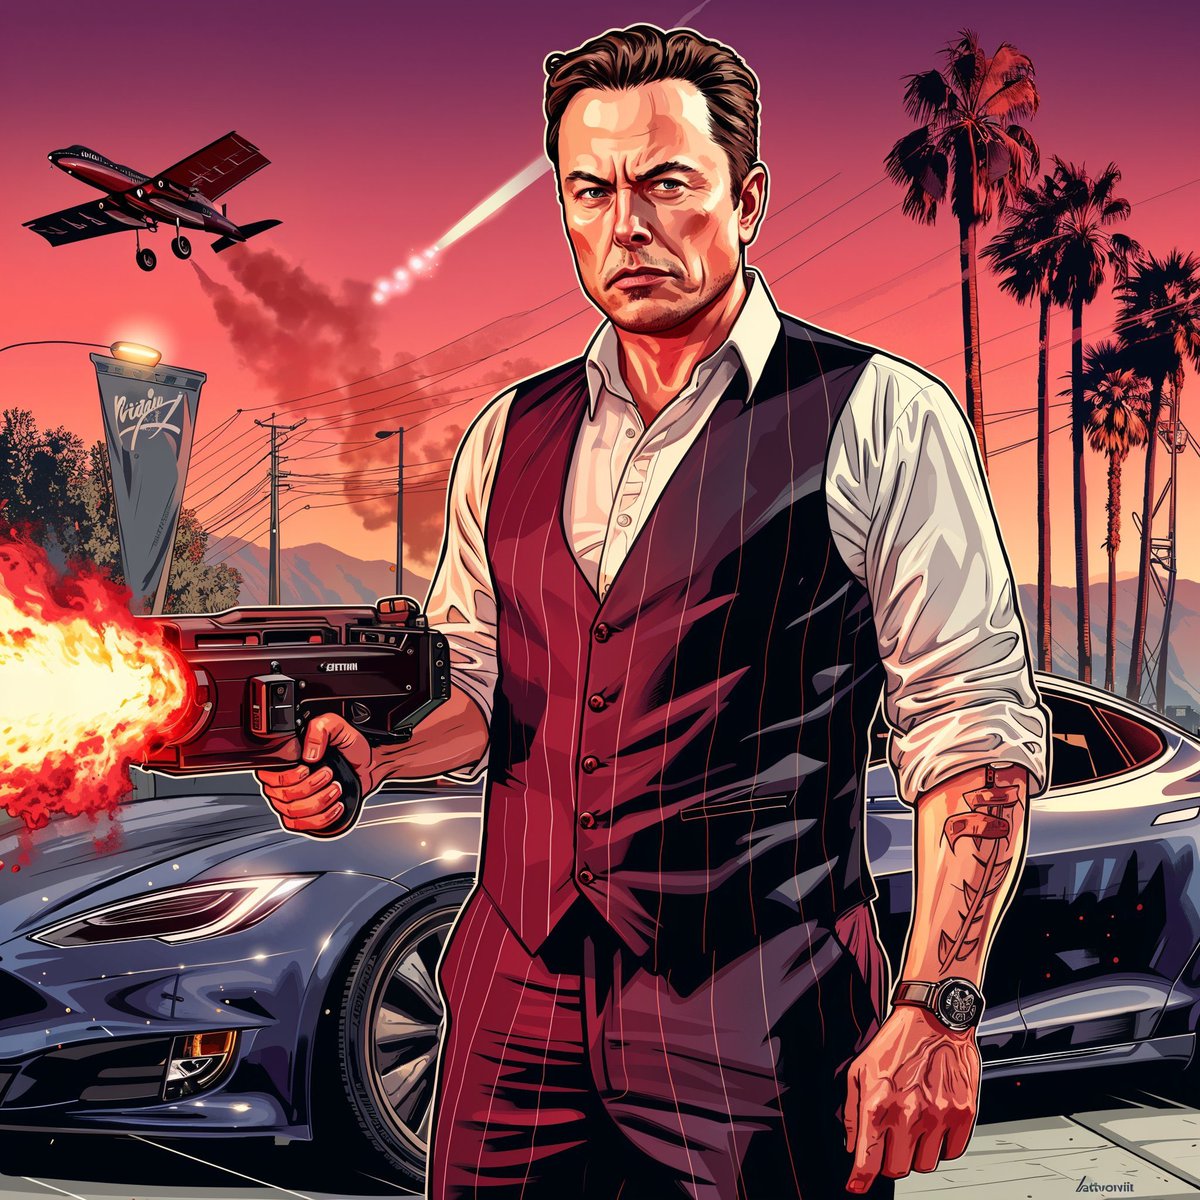 I used Midjourney v6 to create “Grand Theft Auto” versions of famous people. The results are incredible. 1. Elon Musk